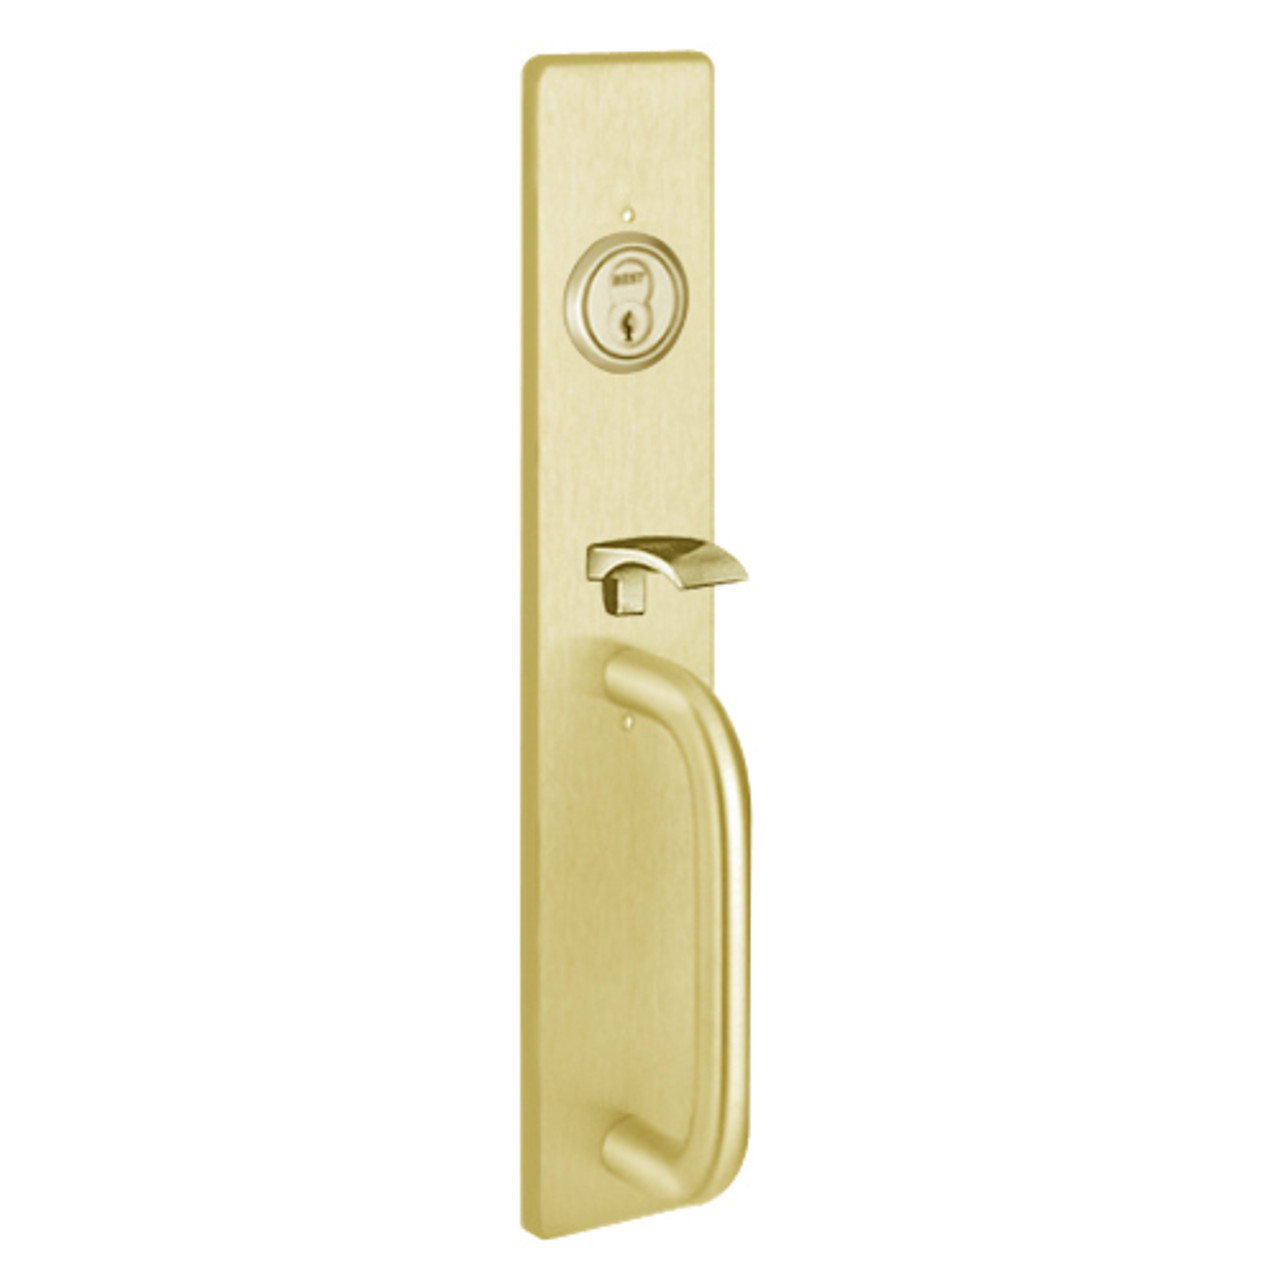 Y1705C-605 PHI Key Controls Thumb Piece Trim with C Design Pull for Olympian Series Device in Bright Brass Finish